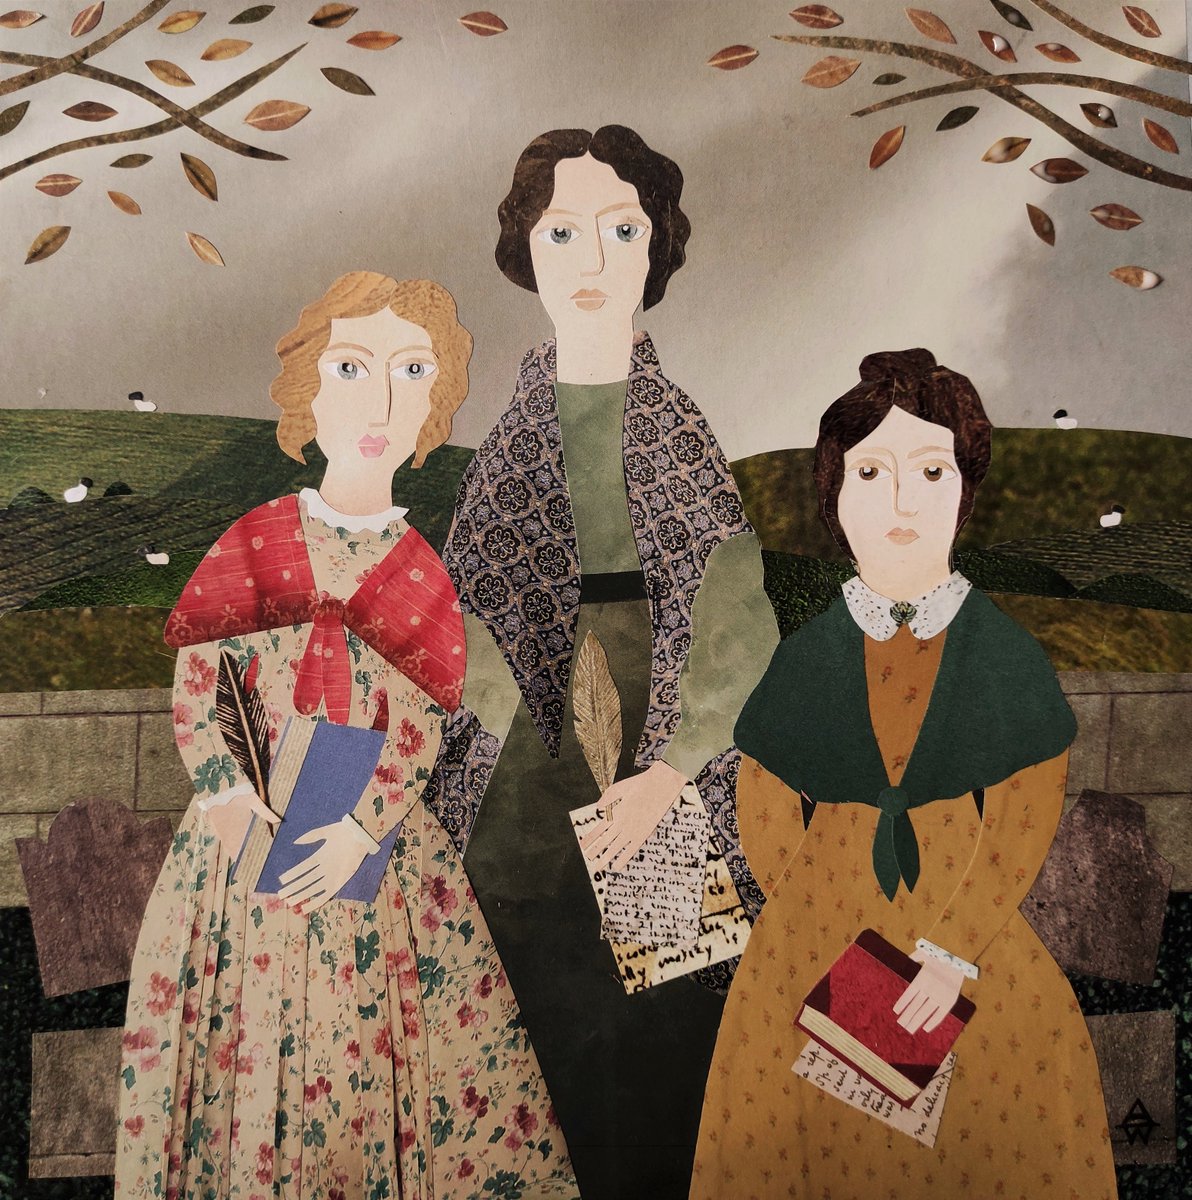 It's Anne Bronte's birthday today! 
204 years young!
Time to read the wonderful Tenant of Wildfell Hall again!
amandawhitedesign.etsy.com
#AnneBronte #BronteSisters #Haworth